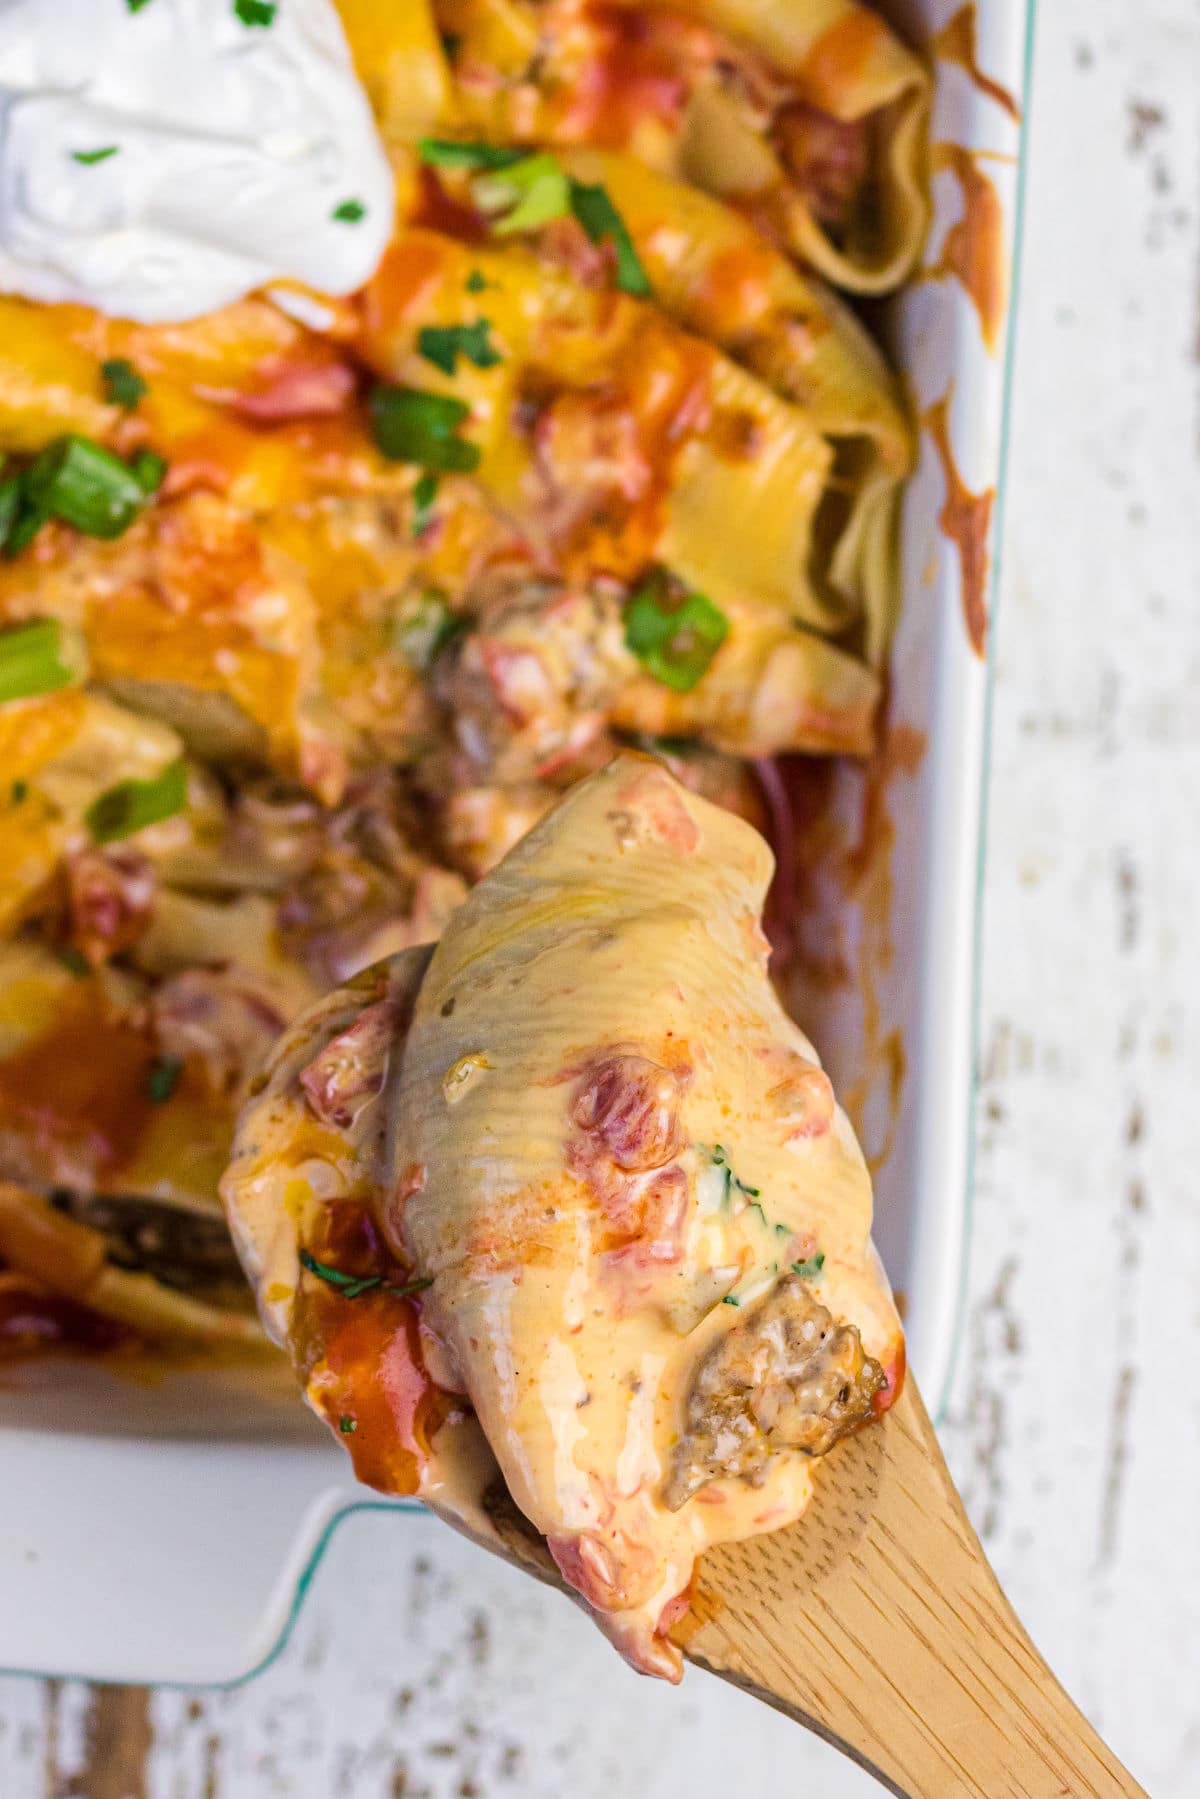 How To Make Mexican Stuffed Shells - Chef Savvy